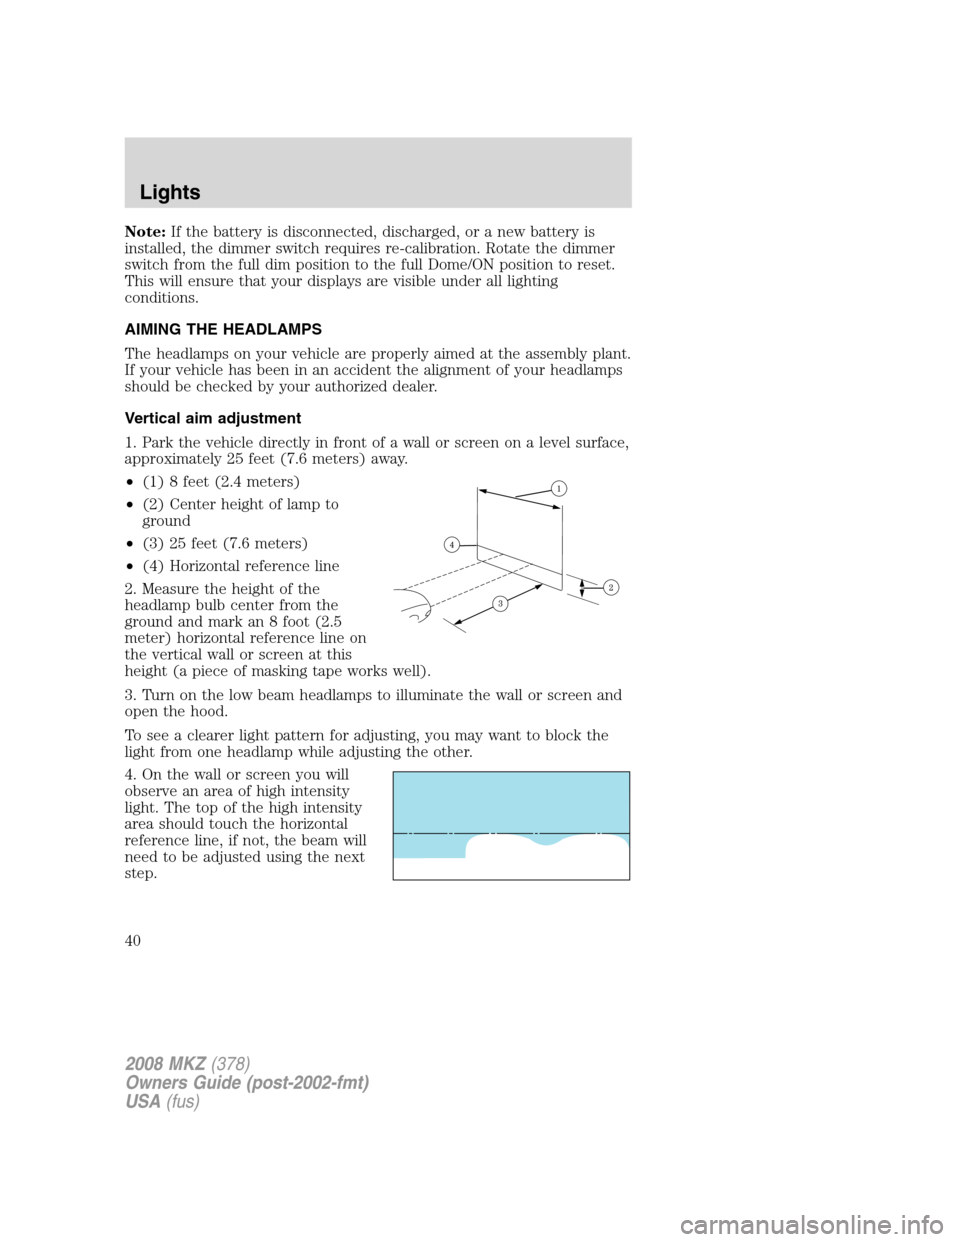 LINCOLN MKZ 2008 Owners Guide Note:If the battery is disconnected, discharged, or a new battery is
installed, the dimmer switch requires re-calibration. Rotate the dimmer
switch from the full dim position to the full Dome/ON posit